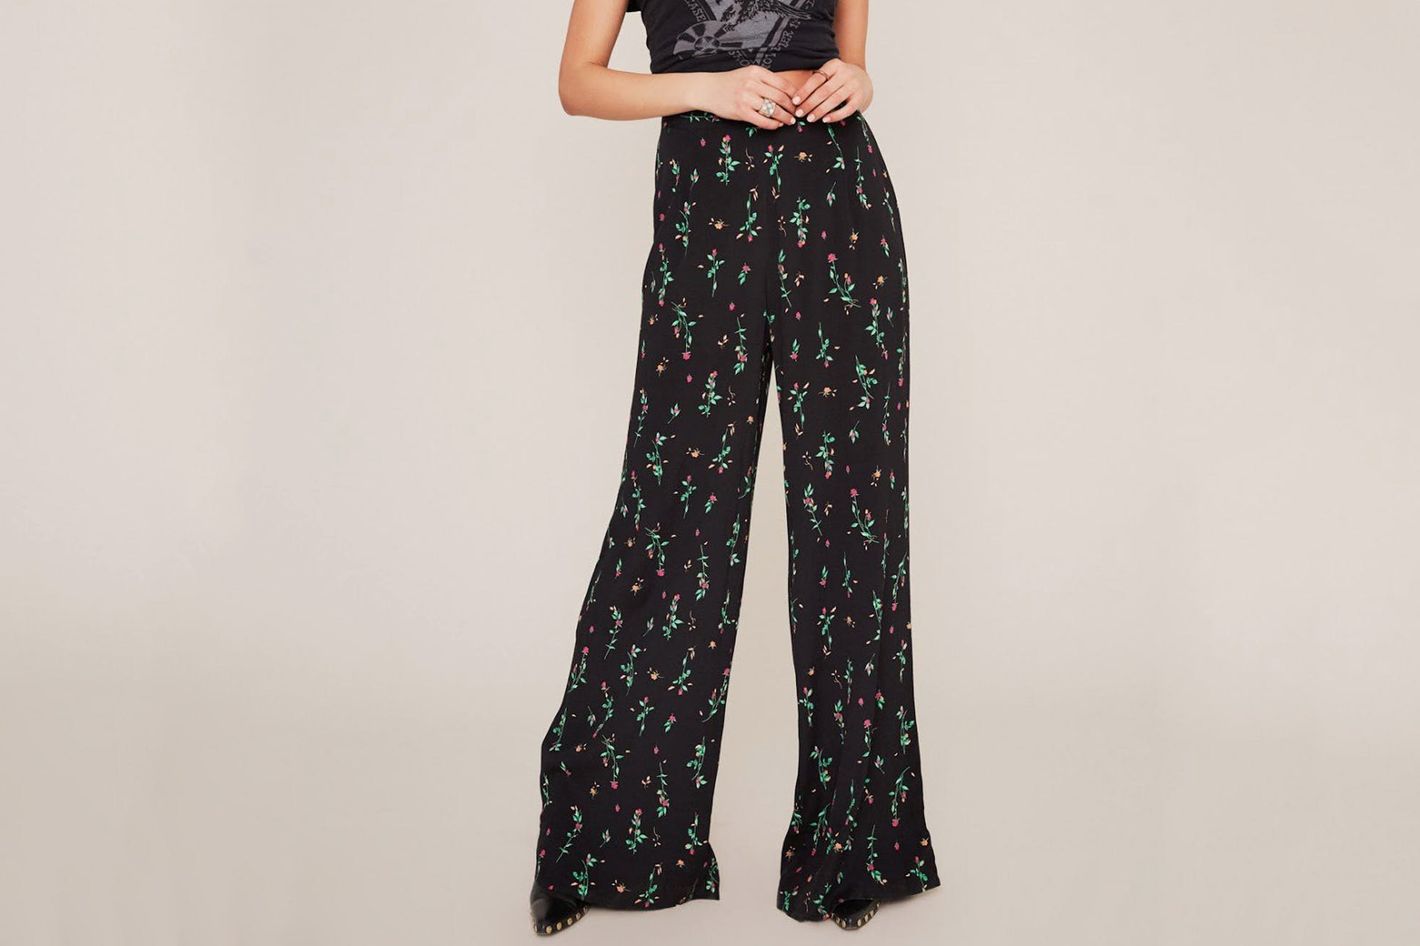 The Best Wide-Leg Cropped Pants Are From Jesse Kamm